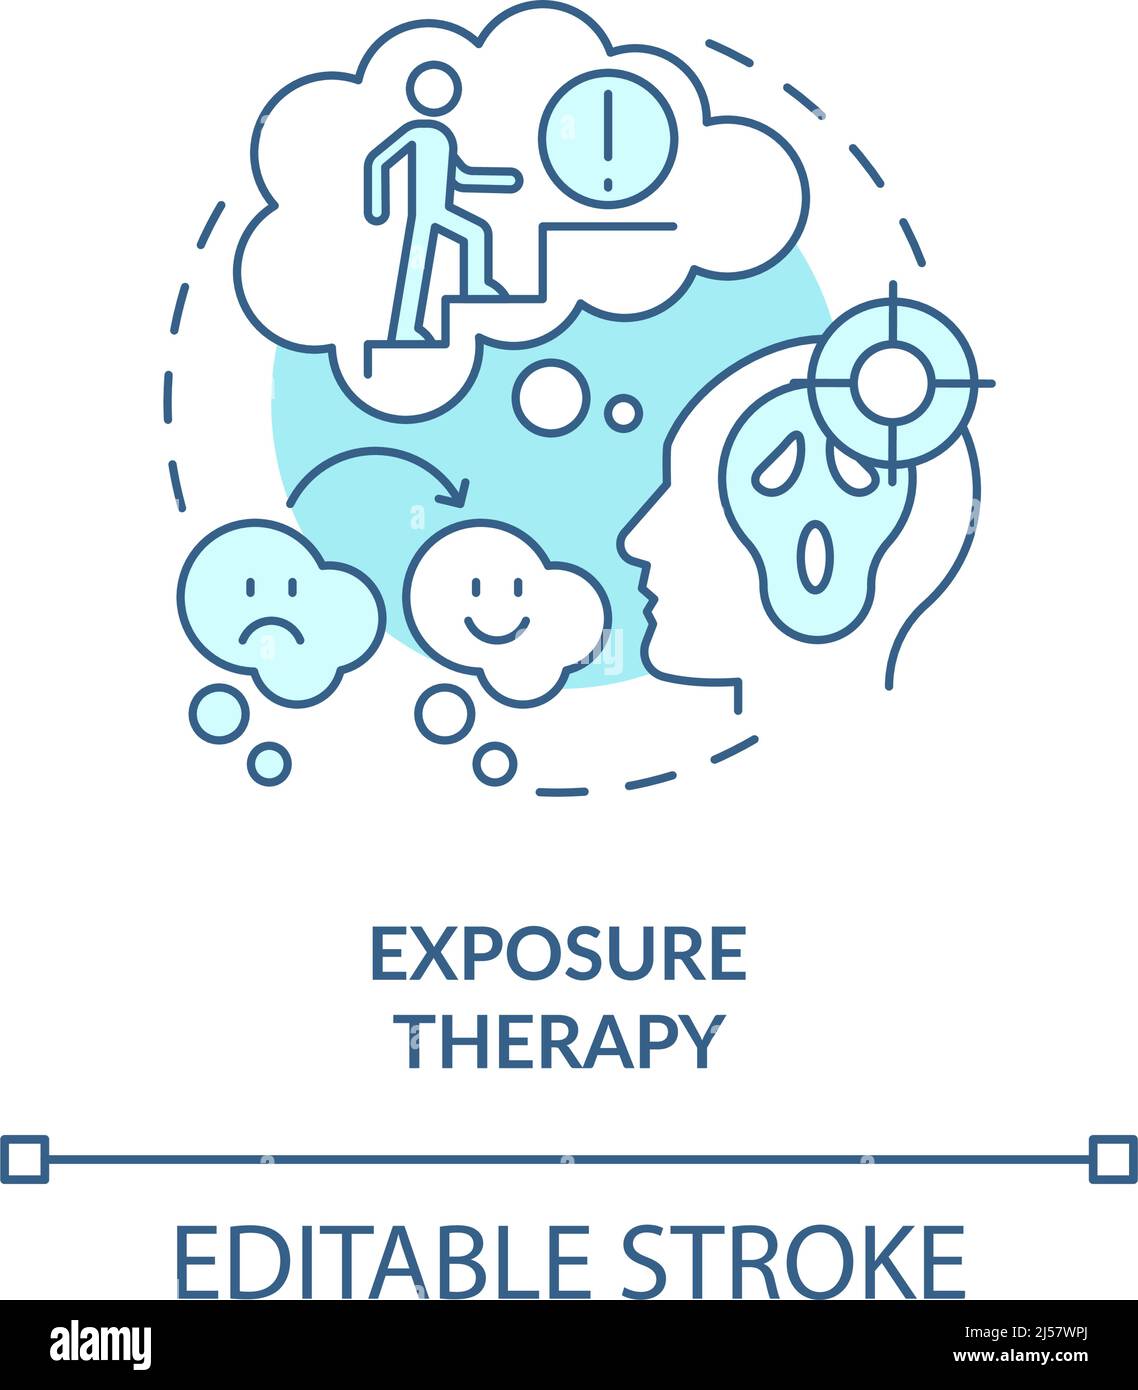 Exposure therapy turquoise concept icon Stock Vector